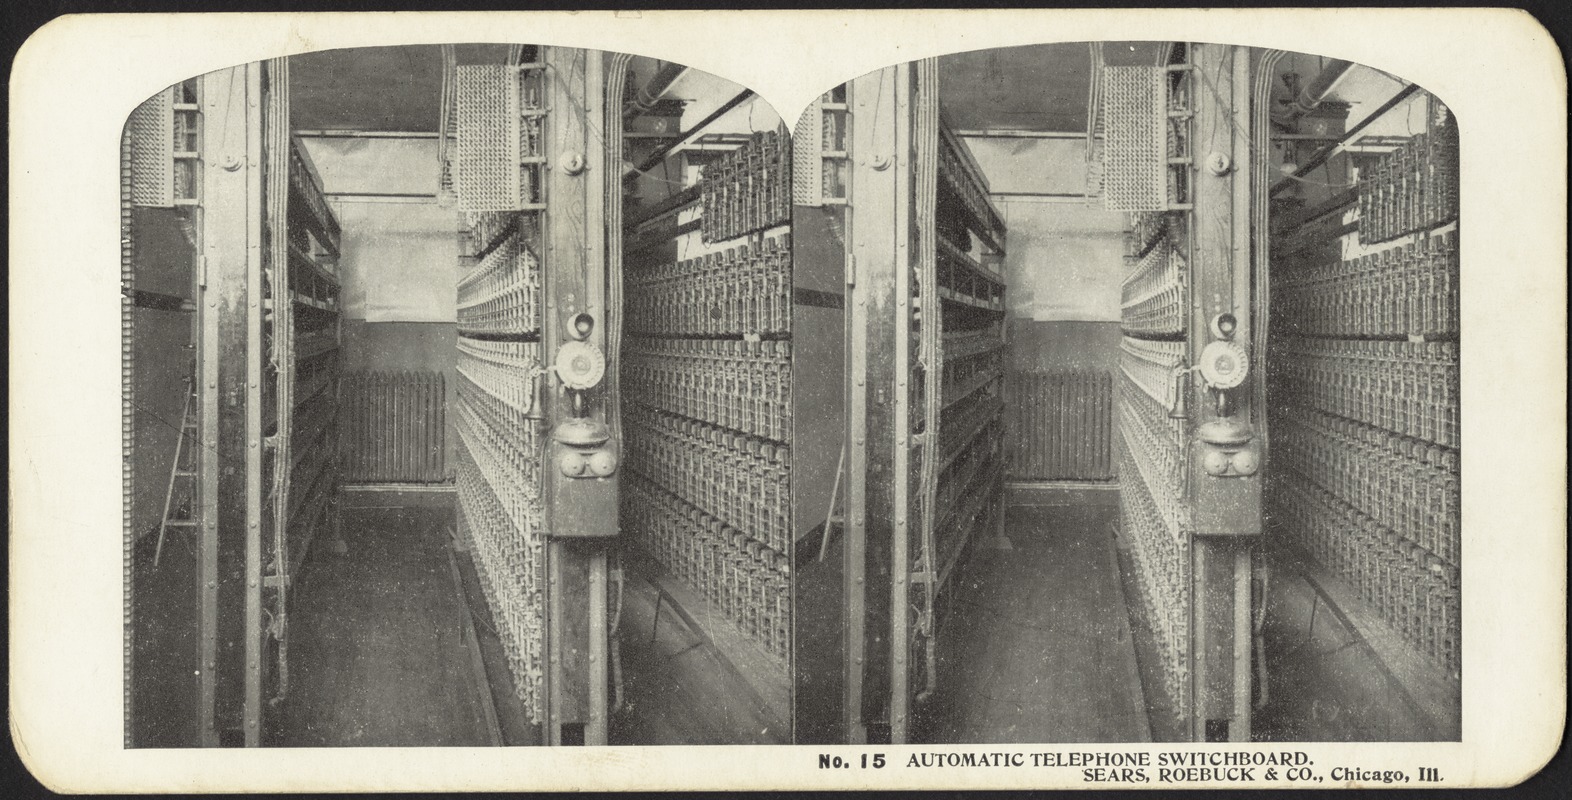 Automatic telephone switchboard